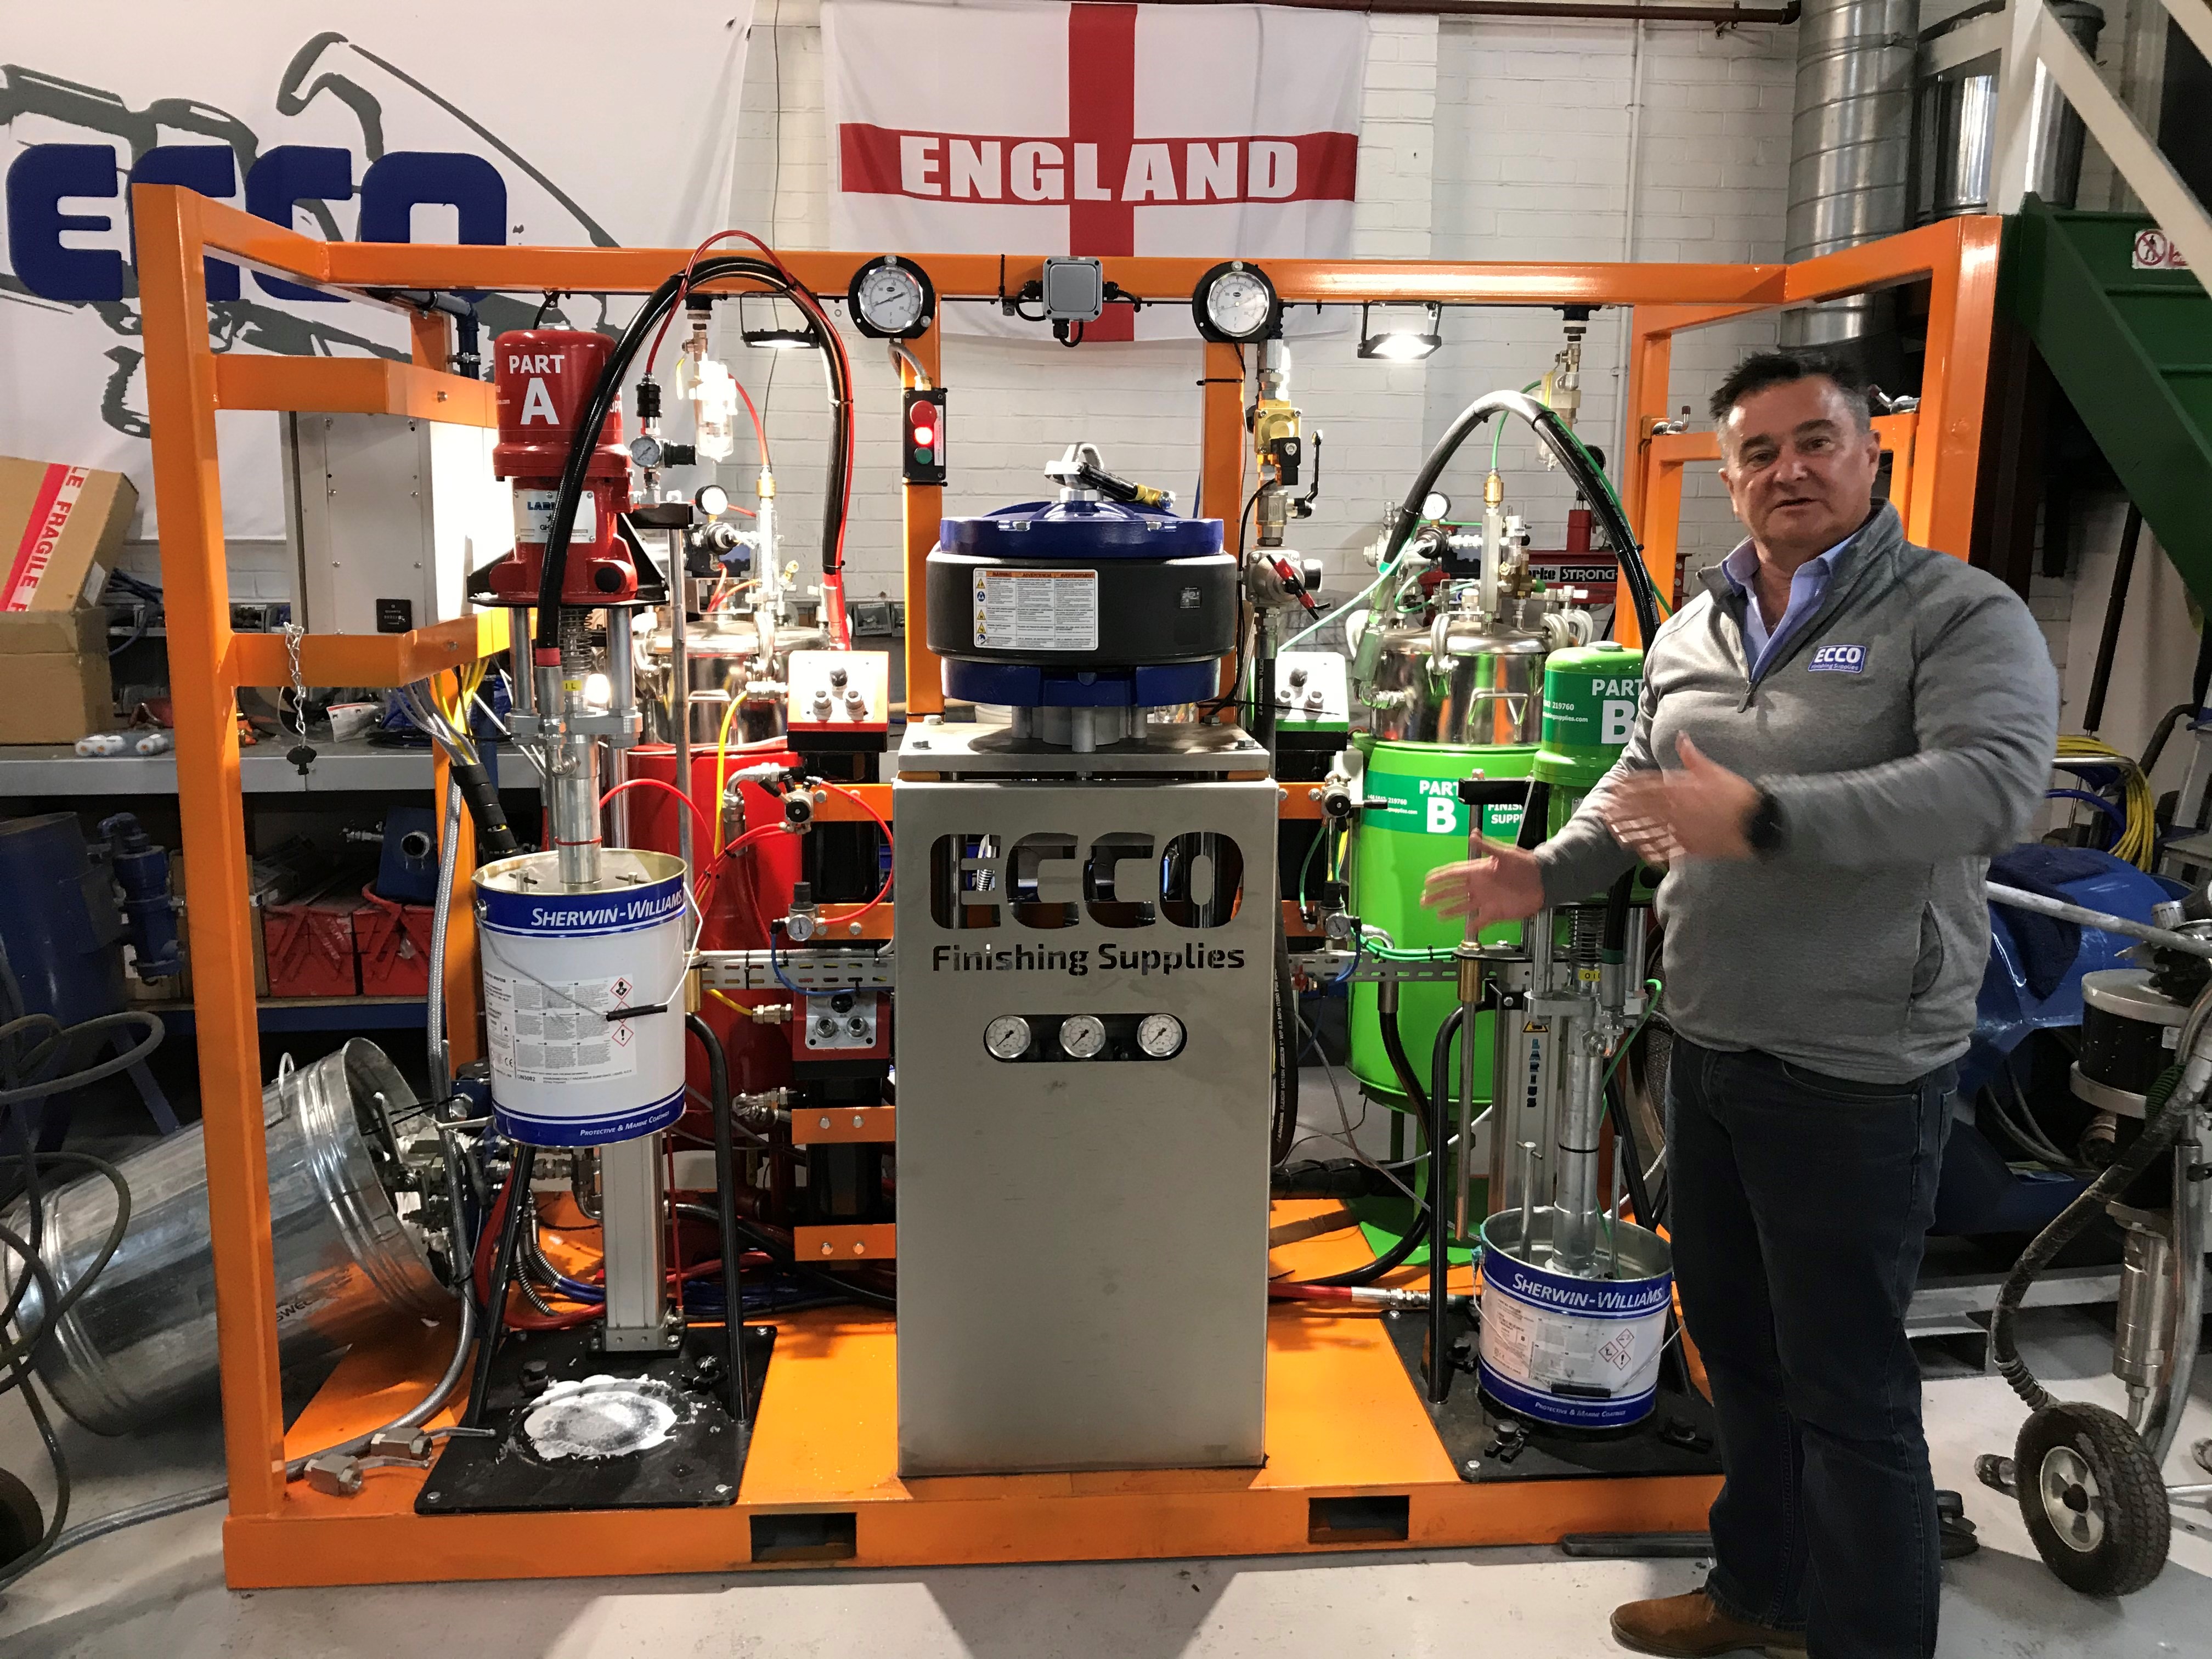 Andy Preston on X: "25-year-old #Middlesbrough business Ecco Finishing Supplies stamp “Made in Middlesbrough” every fire protection machine they manufacture. And export to Kazakhstan, Russia, South America, Australia and the Far